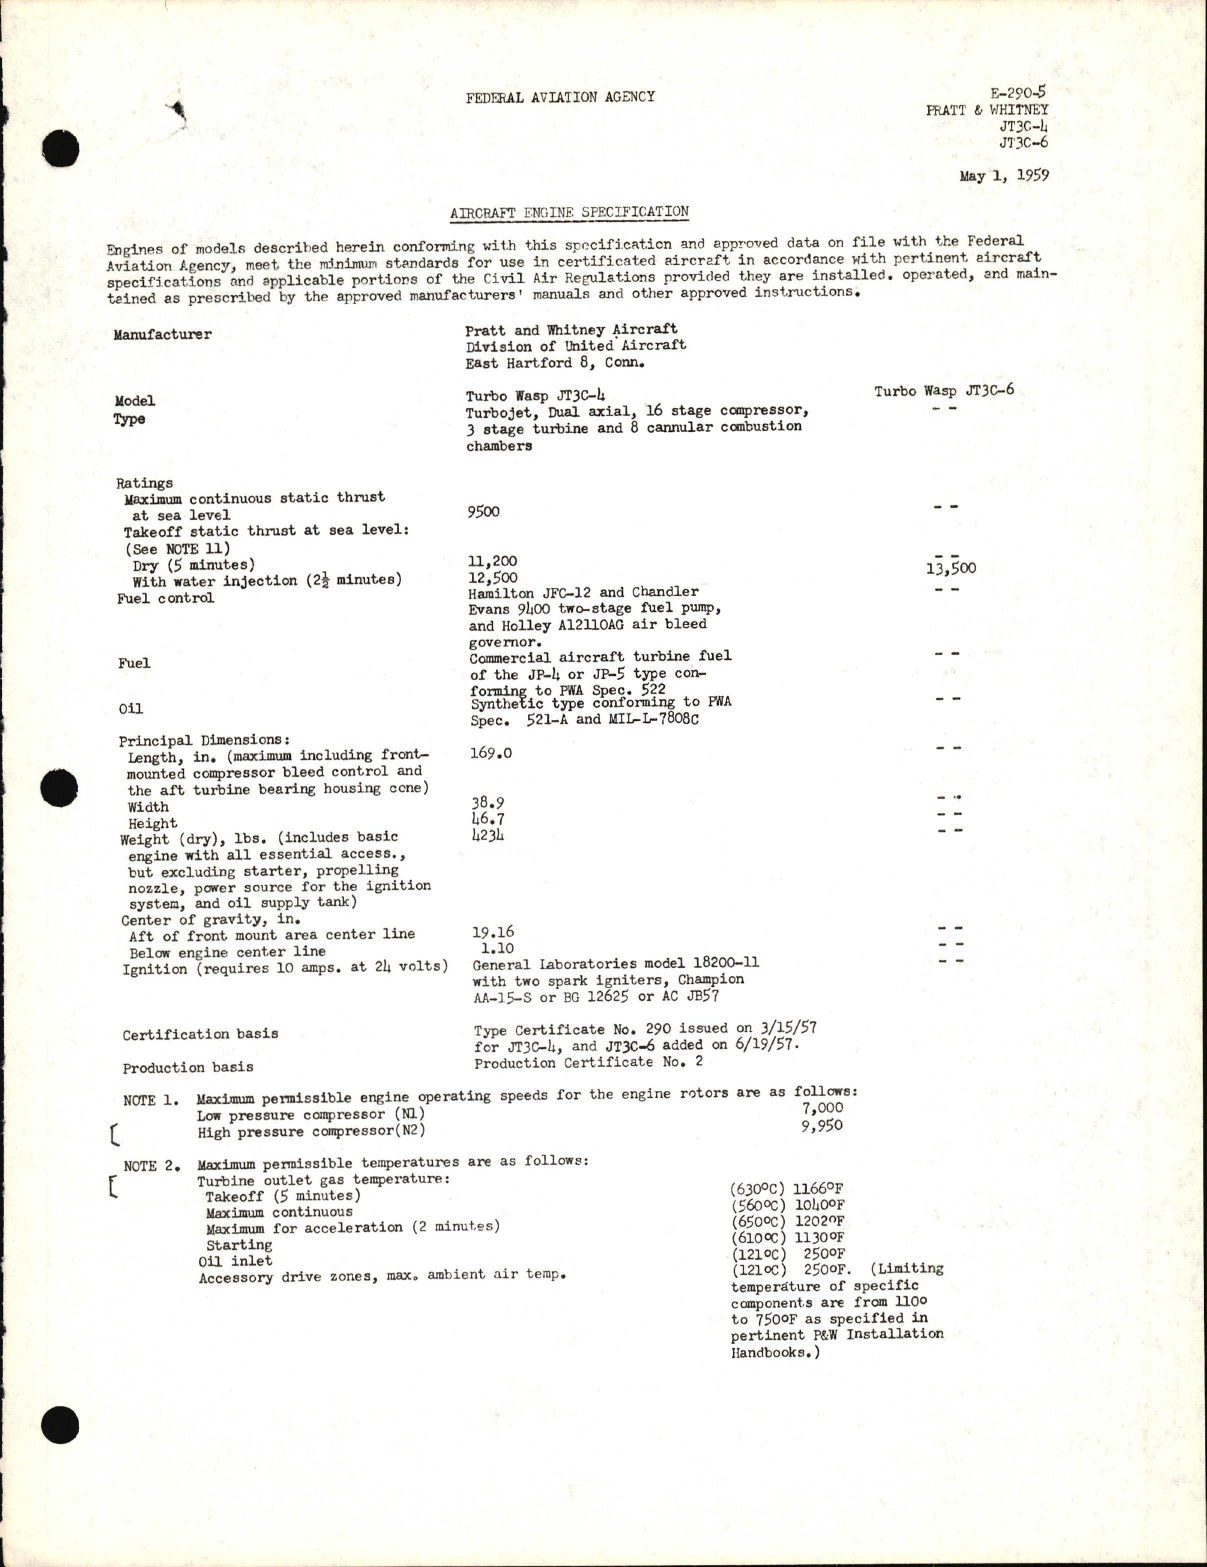 Sample page 1 from AirCorps Library document: JT3C-4 and JT3C-6